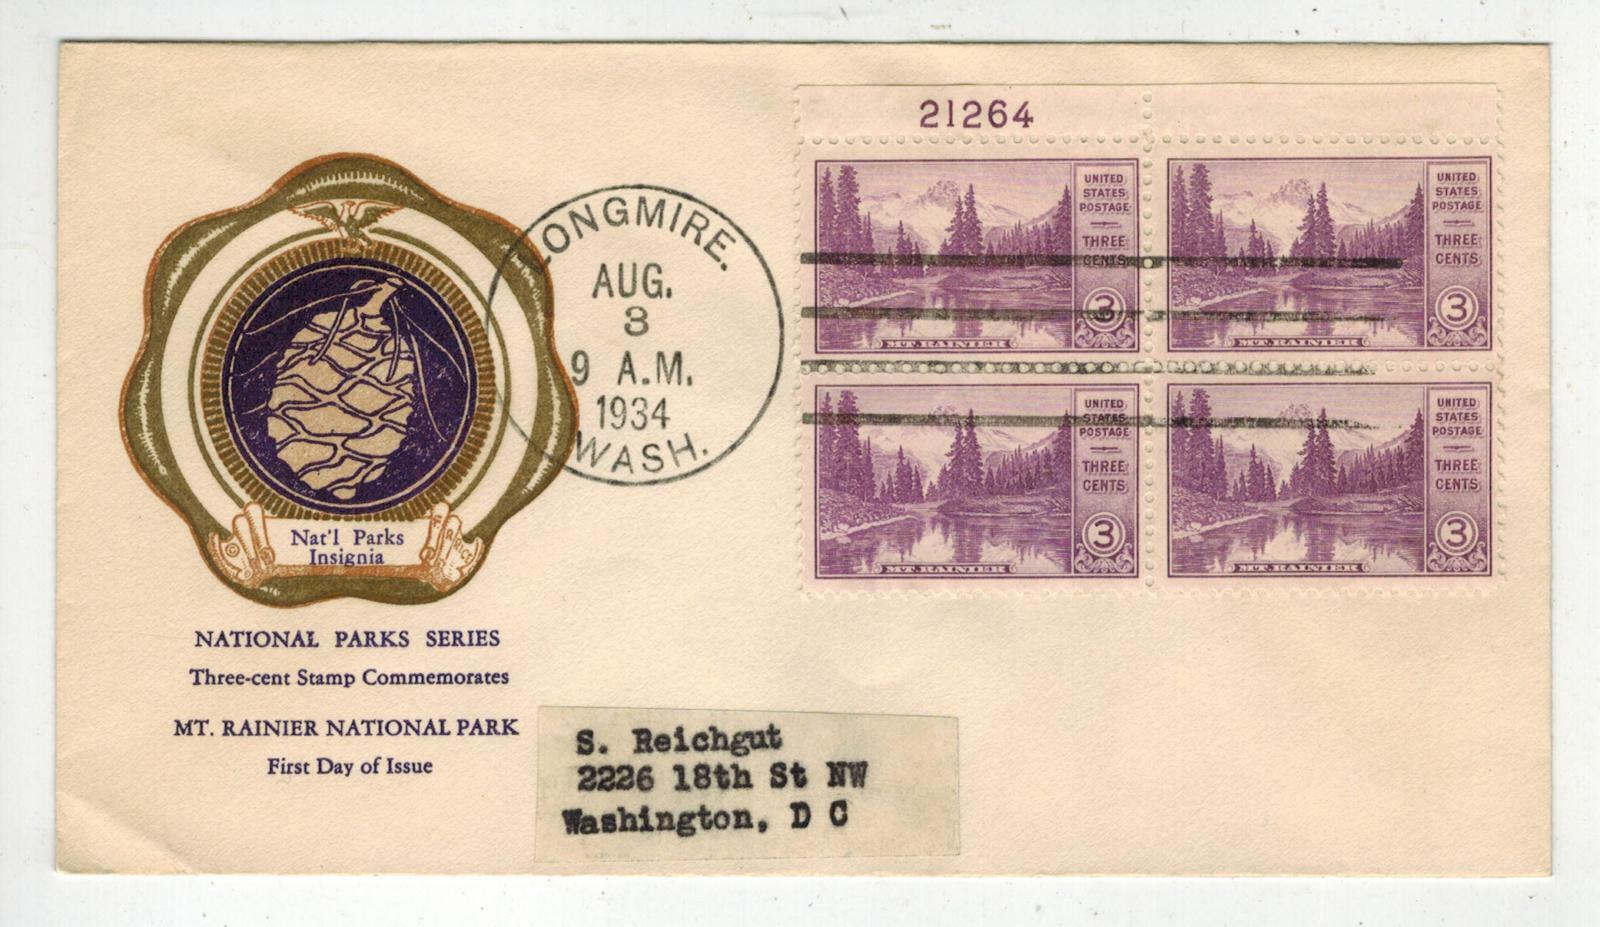 1934 MOUNT RAINIER NATIONAL PARK 742 Rice PLATE BLOCK Factory outlet Longmi FDC Courier shipping free